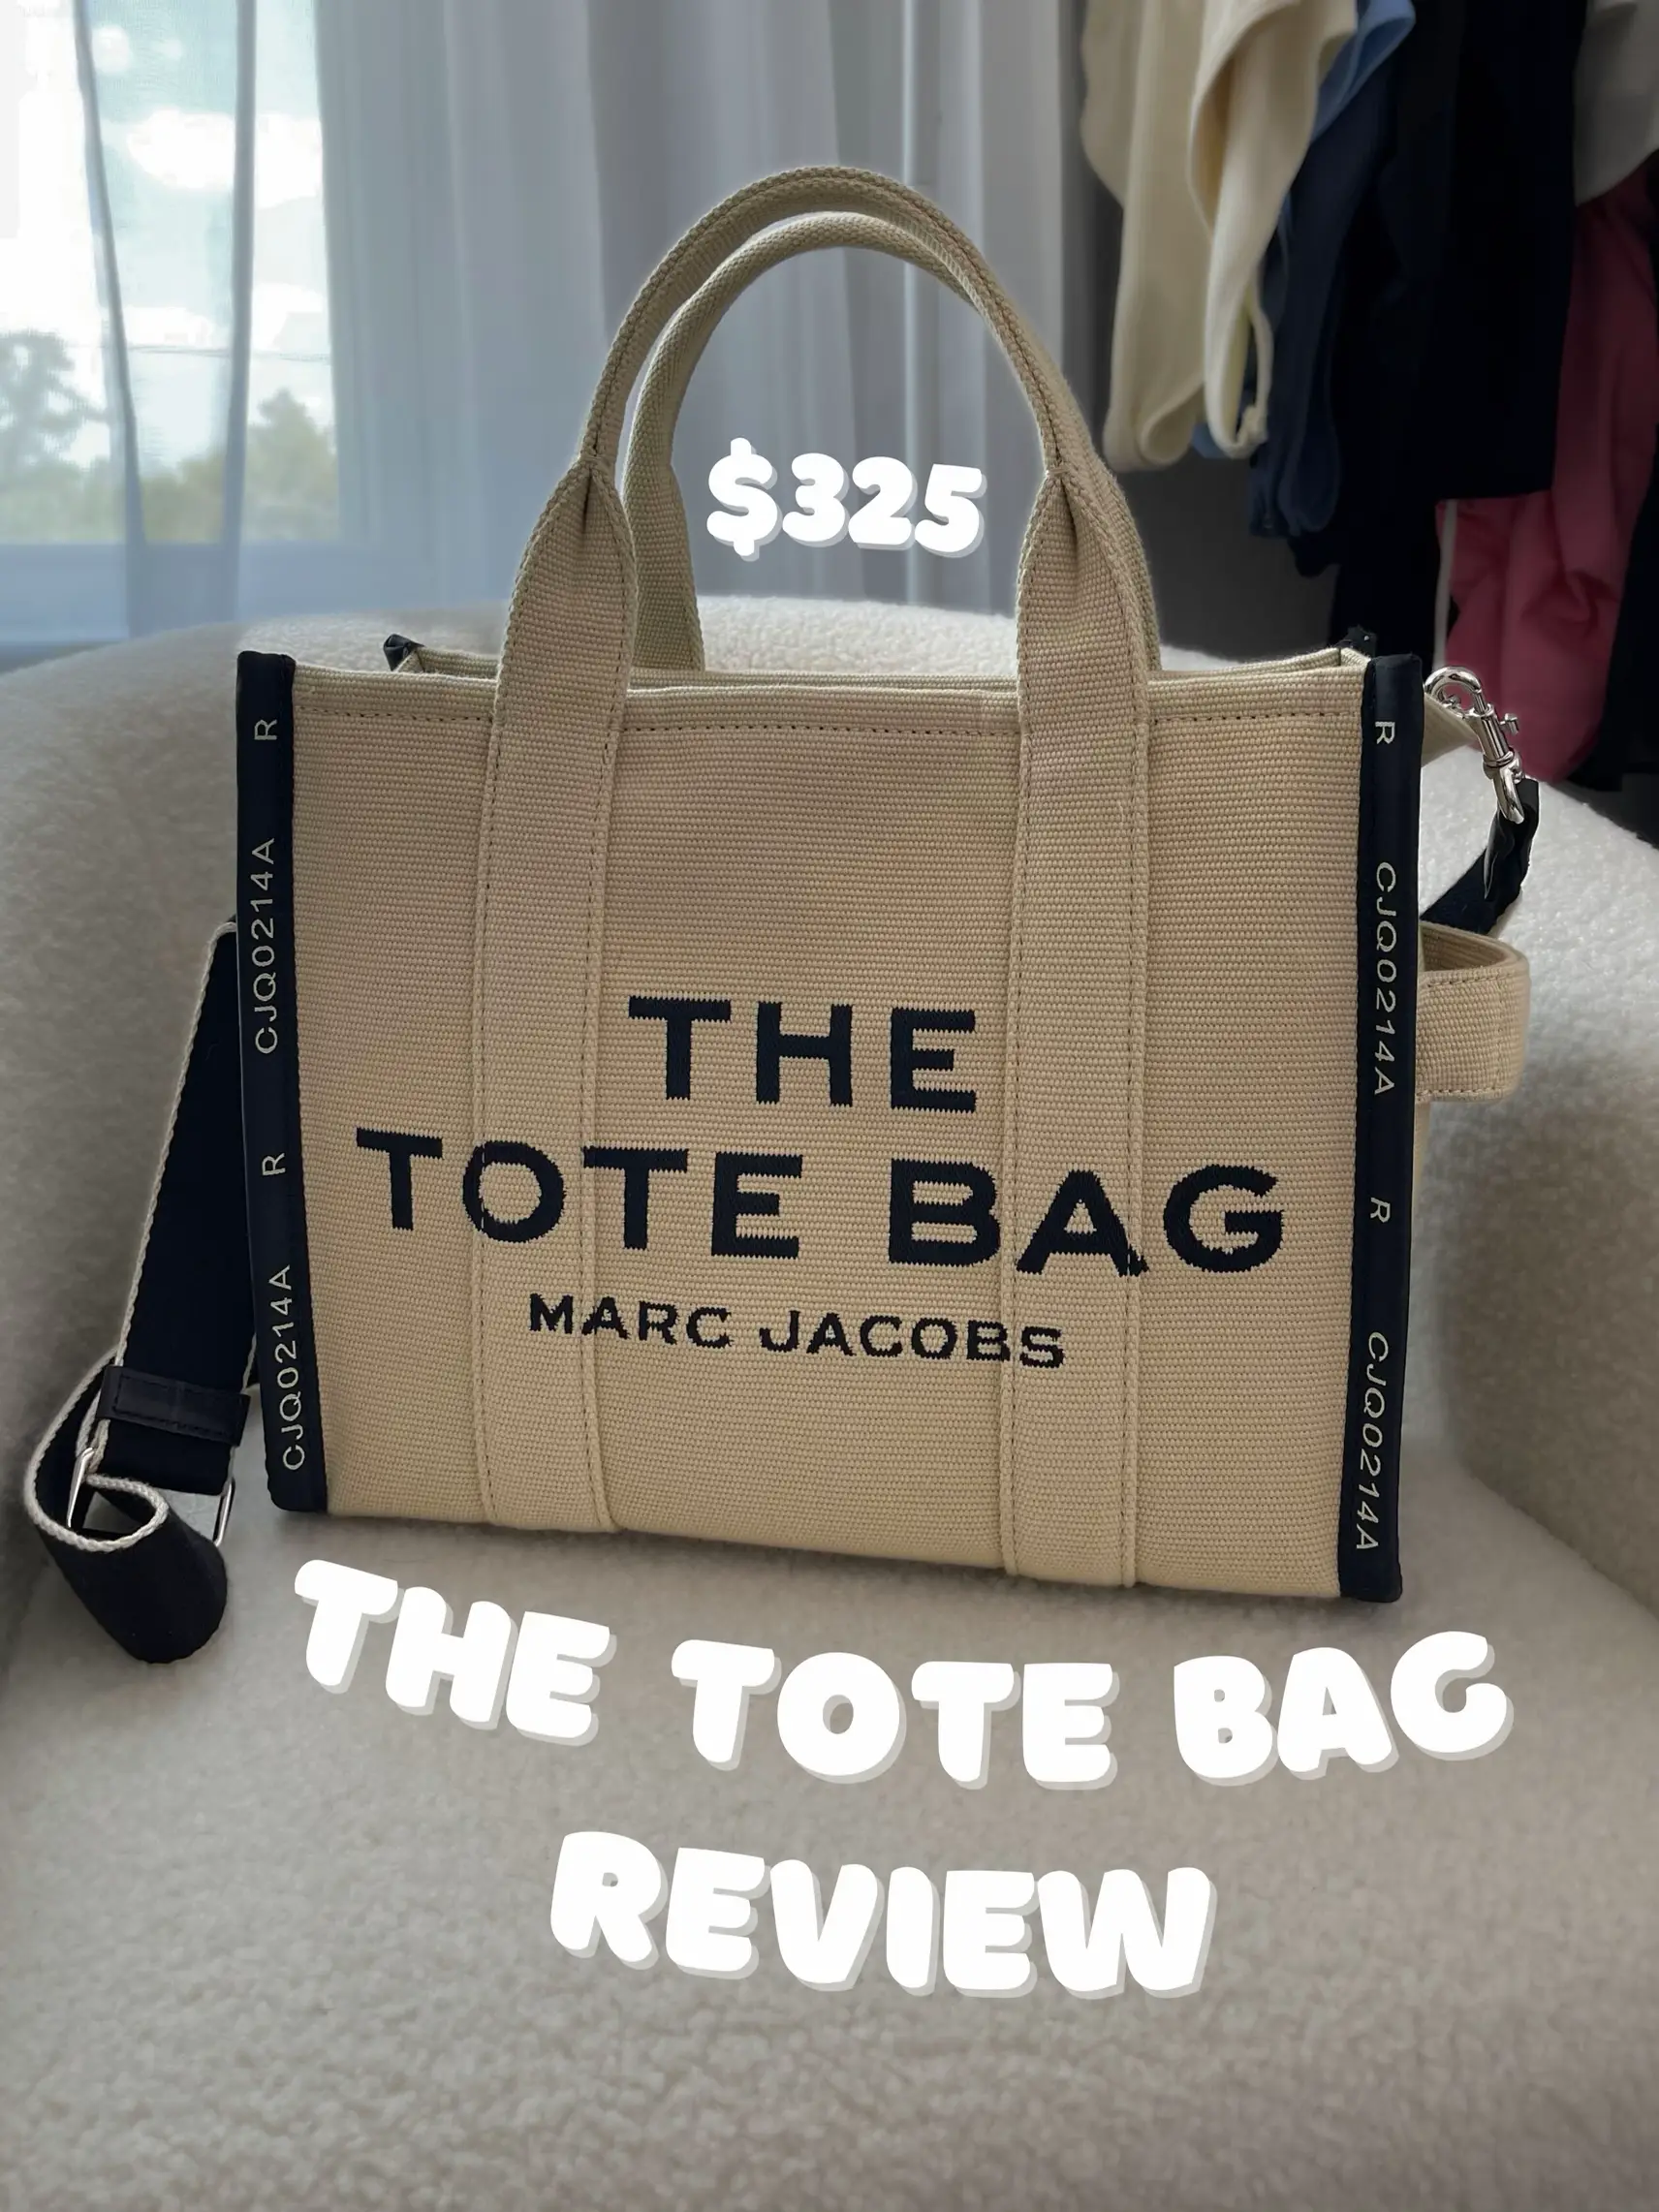 Does anyone know where I can find the Marc Jacob tote bags? : r/DHgate